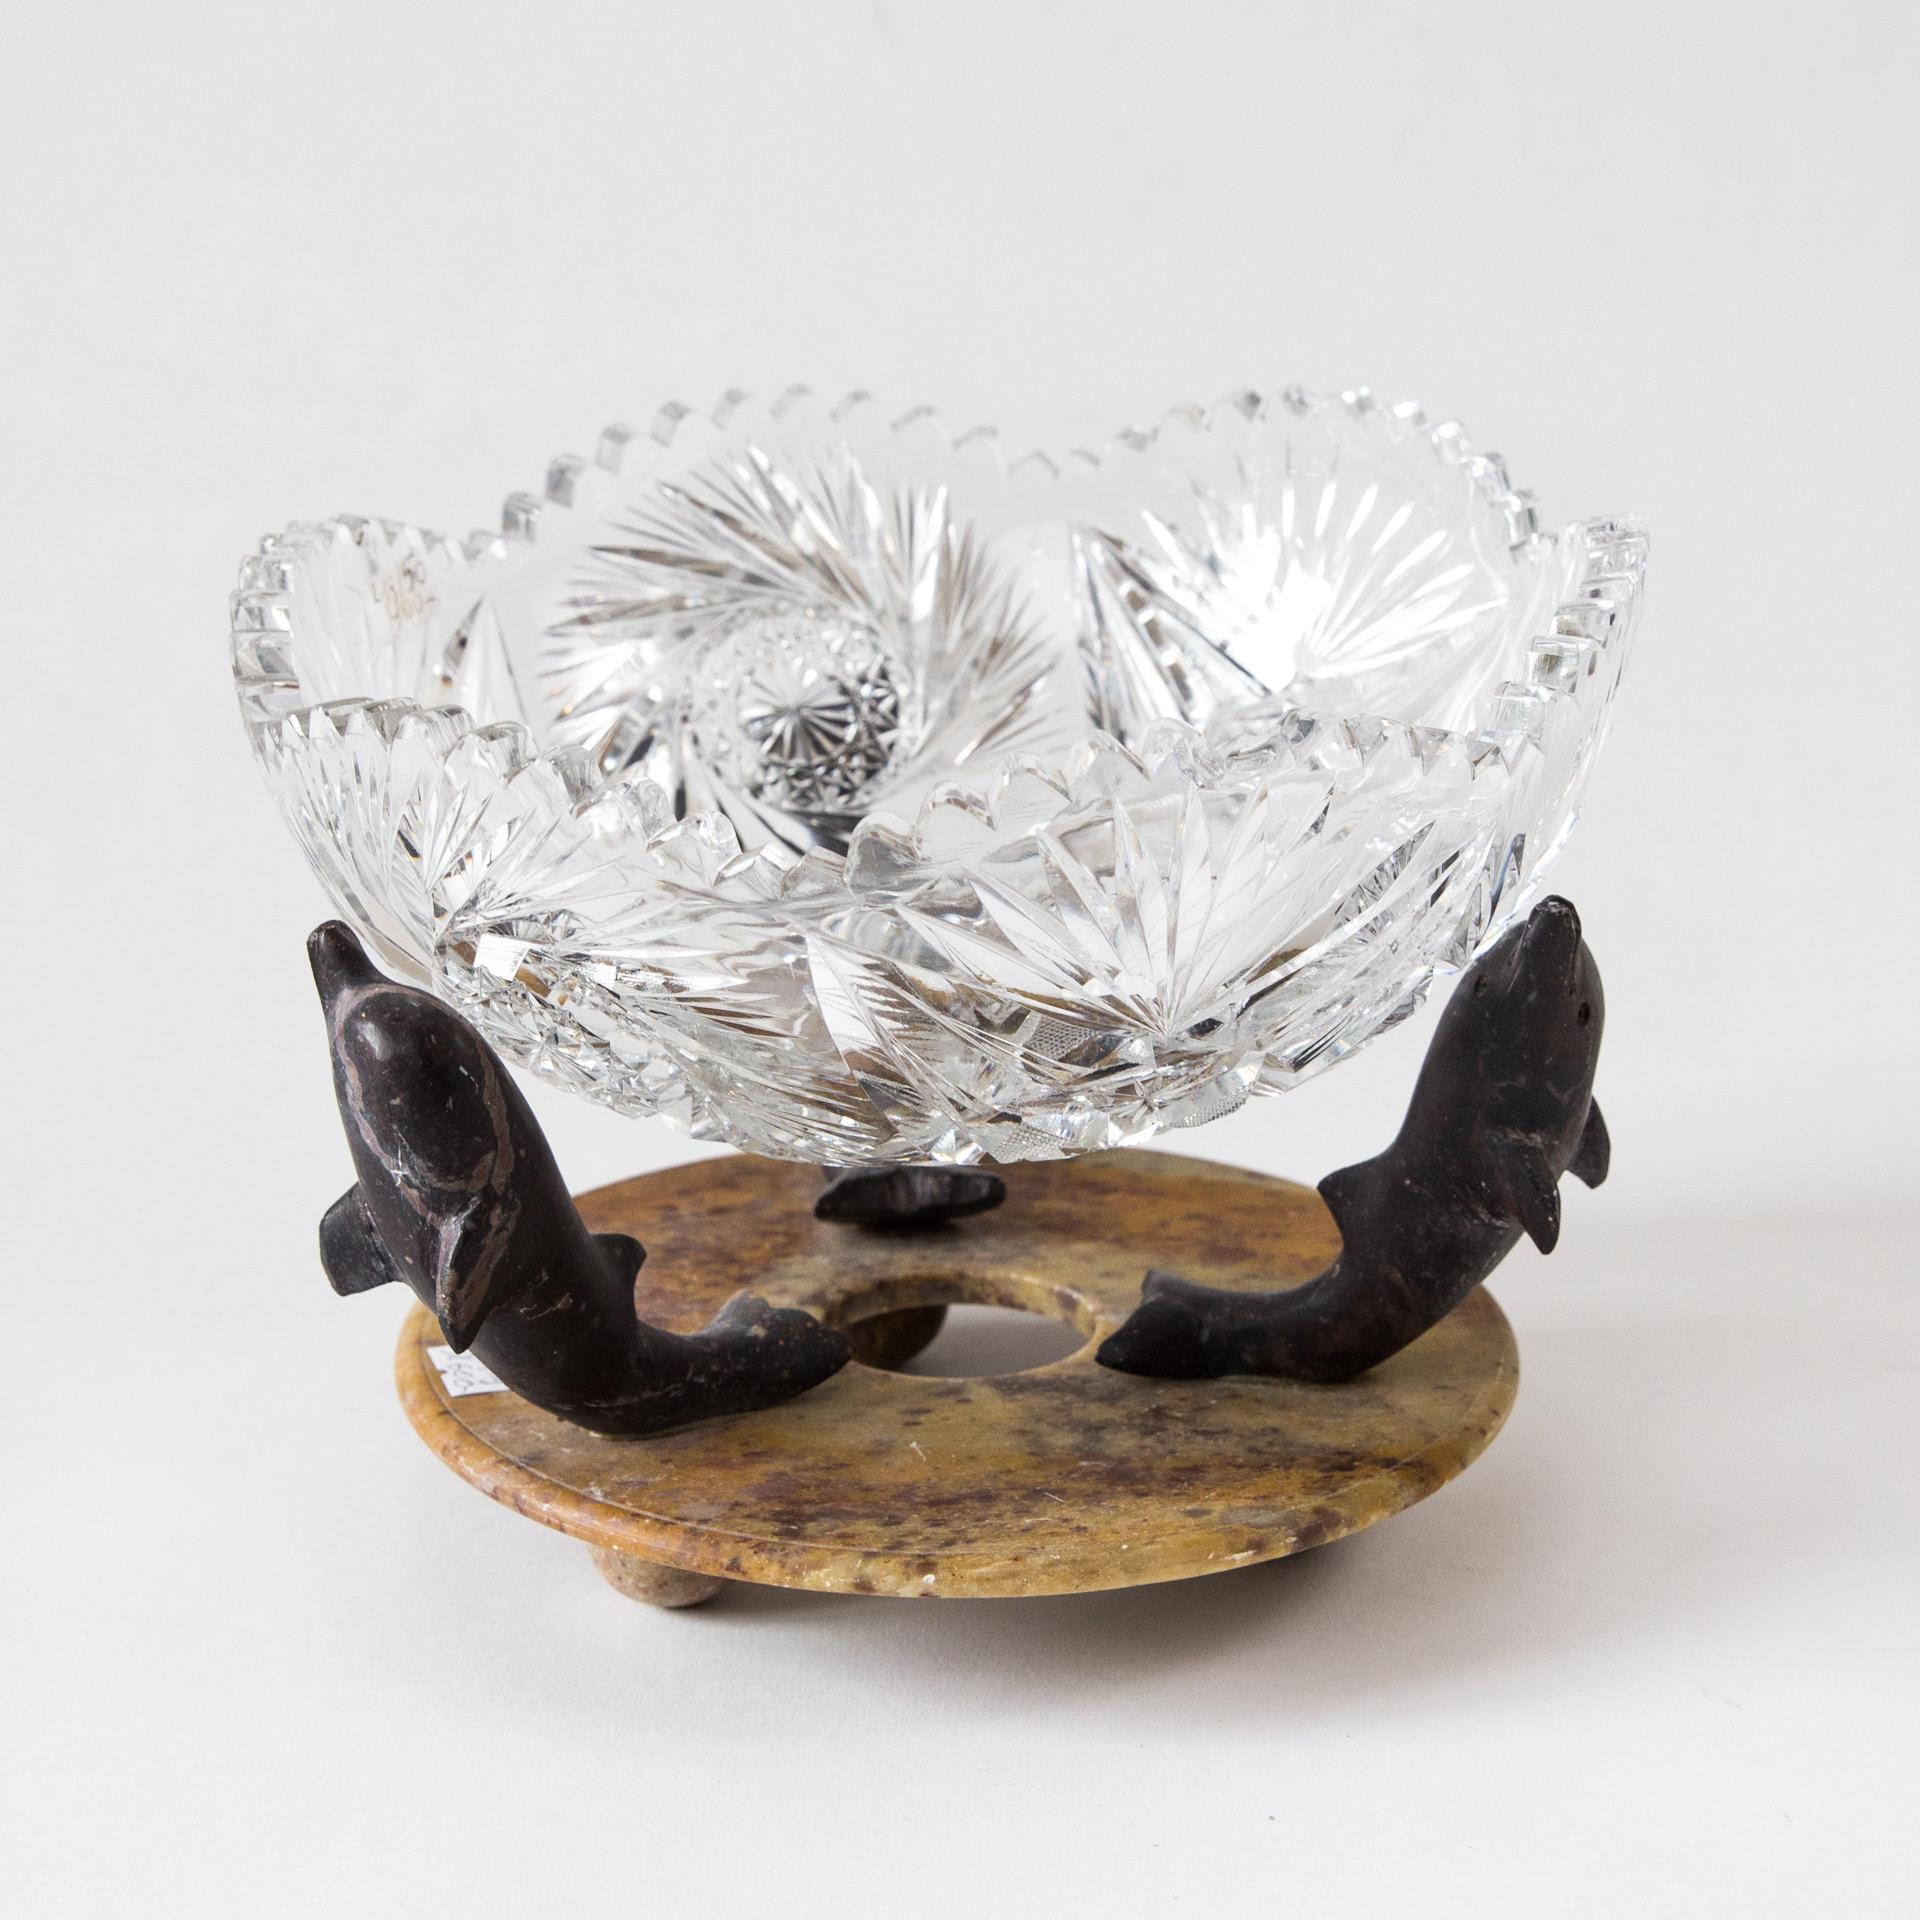 The unique plateau is the quintessence of the Art Deco style. It is characterized by a unique combination of dancing dolphins that support the crystal bowl as structural elements.

The basis is a round, stone plate in shades of melange, brown-gold